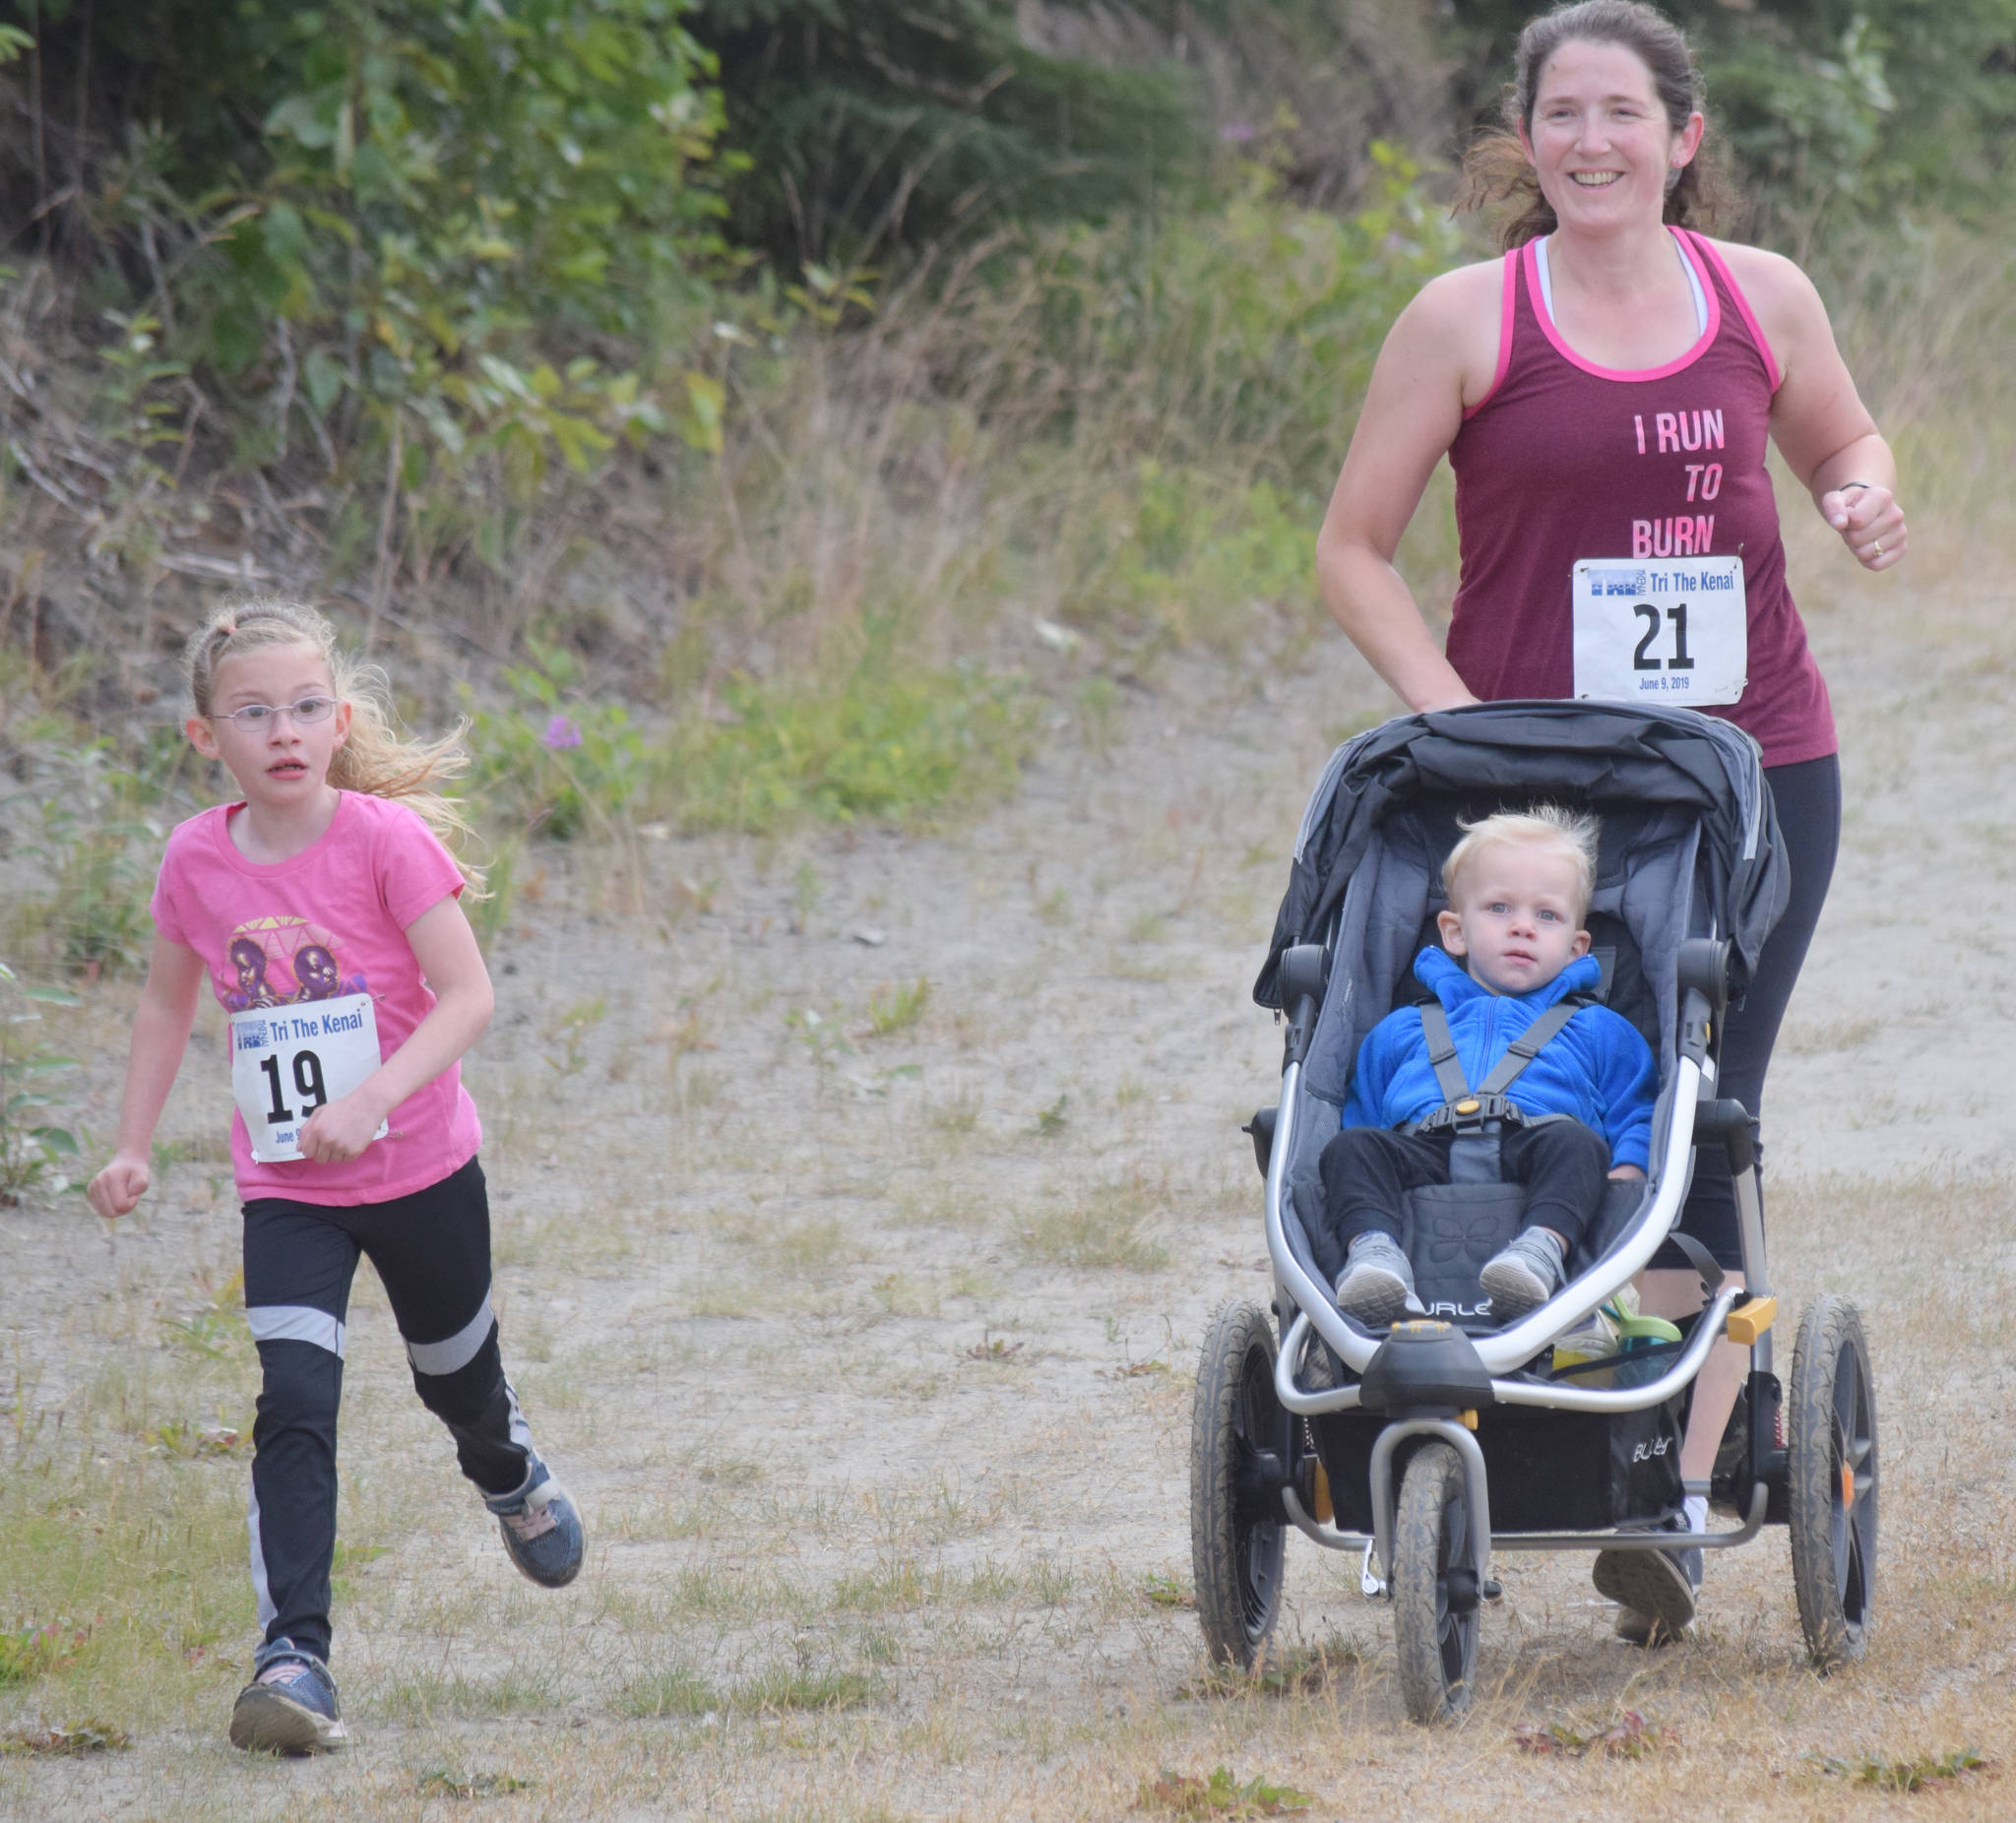 Denali Tucker, 7, of Soldotna leads her mother, Kandi Barcus, and brother, Justice Tucker, 2, in the Rotary Unity Run on Saturday, July 20, 2019, at Tsalteshi Trails. (Photo by Jeff Helminiak/Peninsula Clarion)